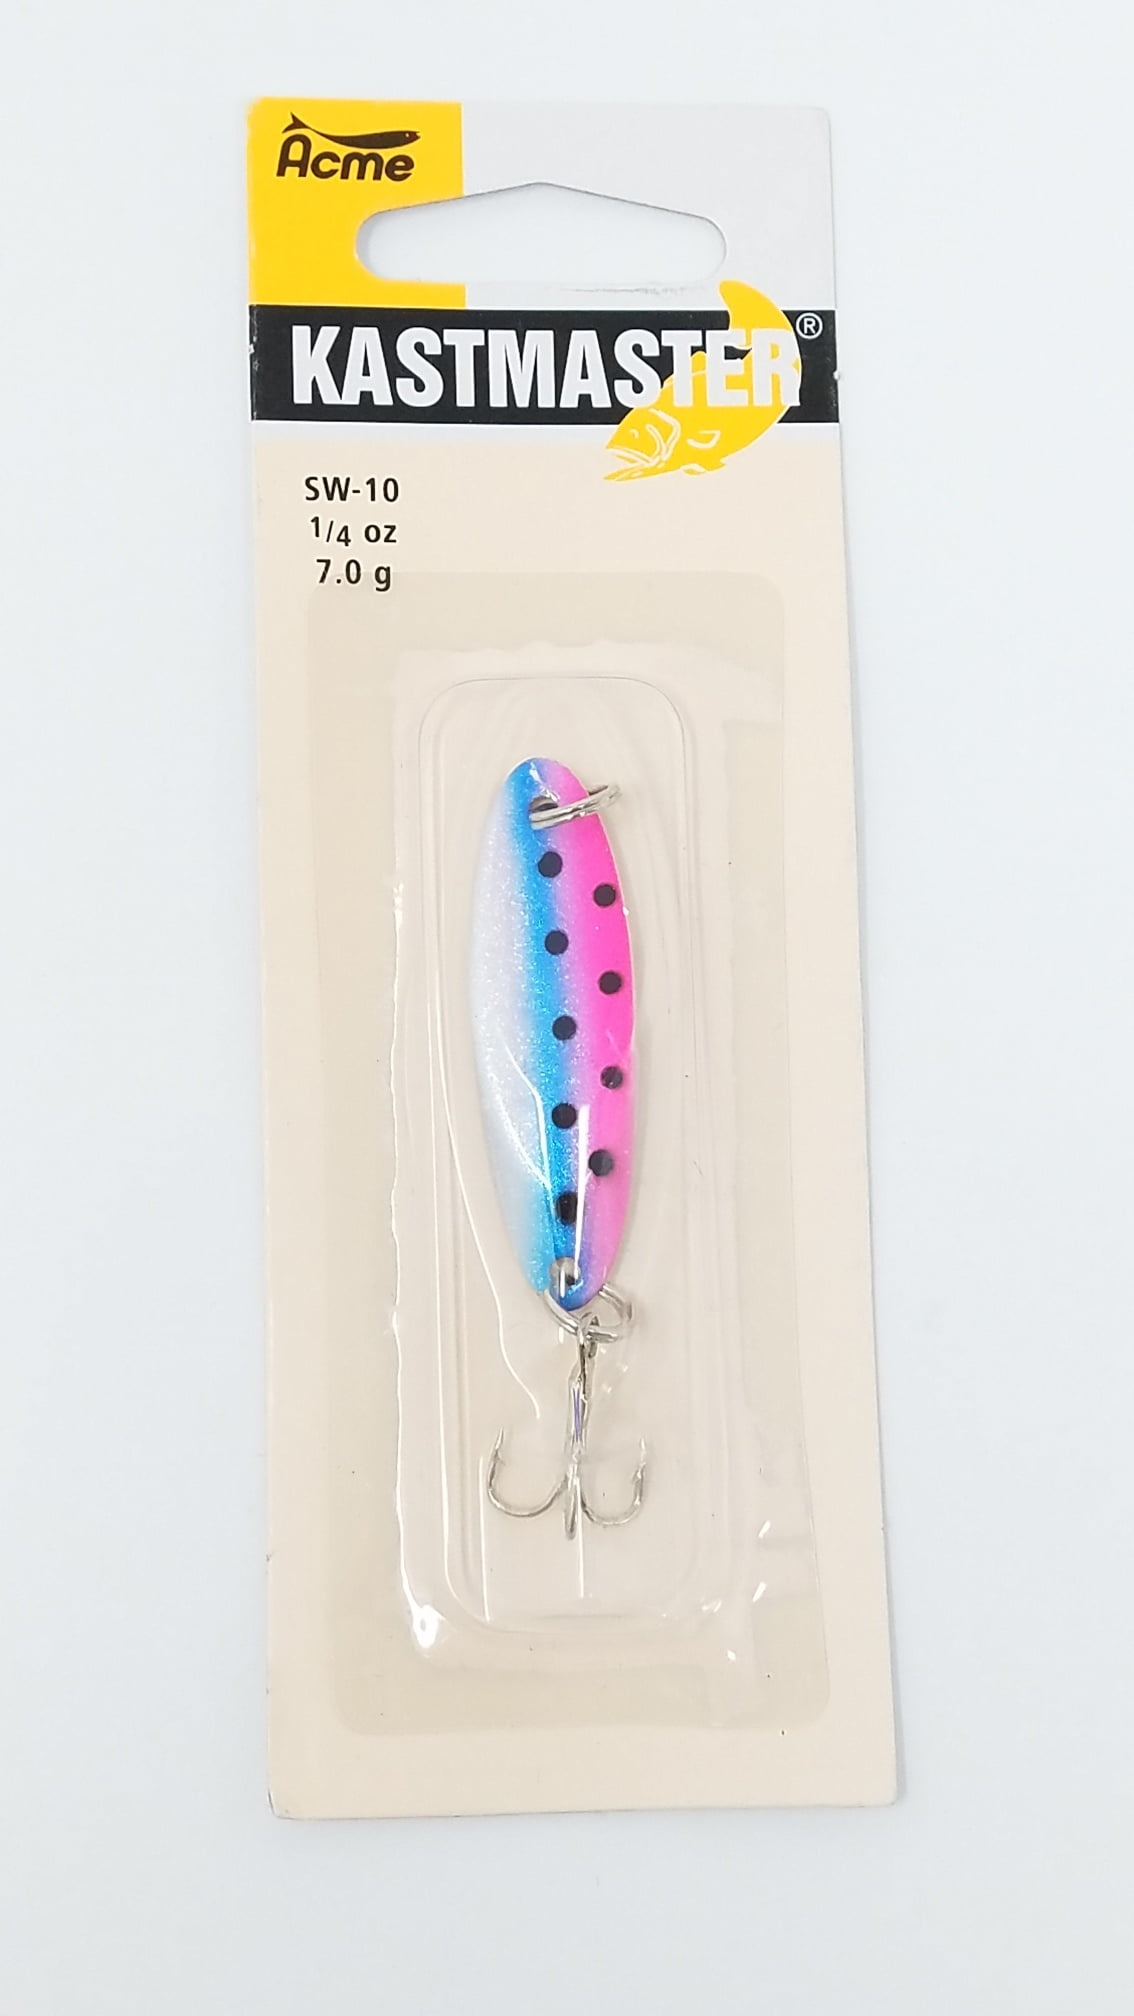 Acme Tackle Kastmaster Fishing Lure Spoon Chrome Neon Blue 1/4 oz 